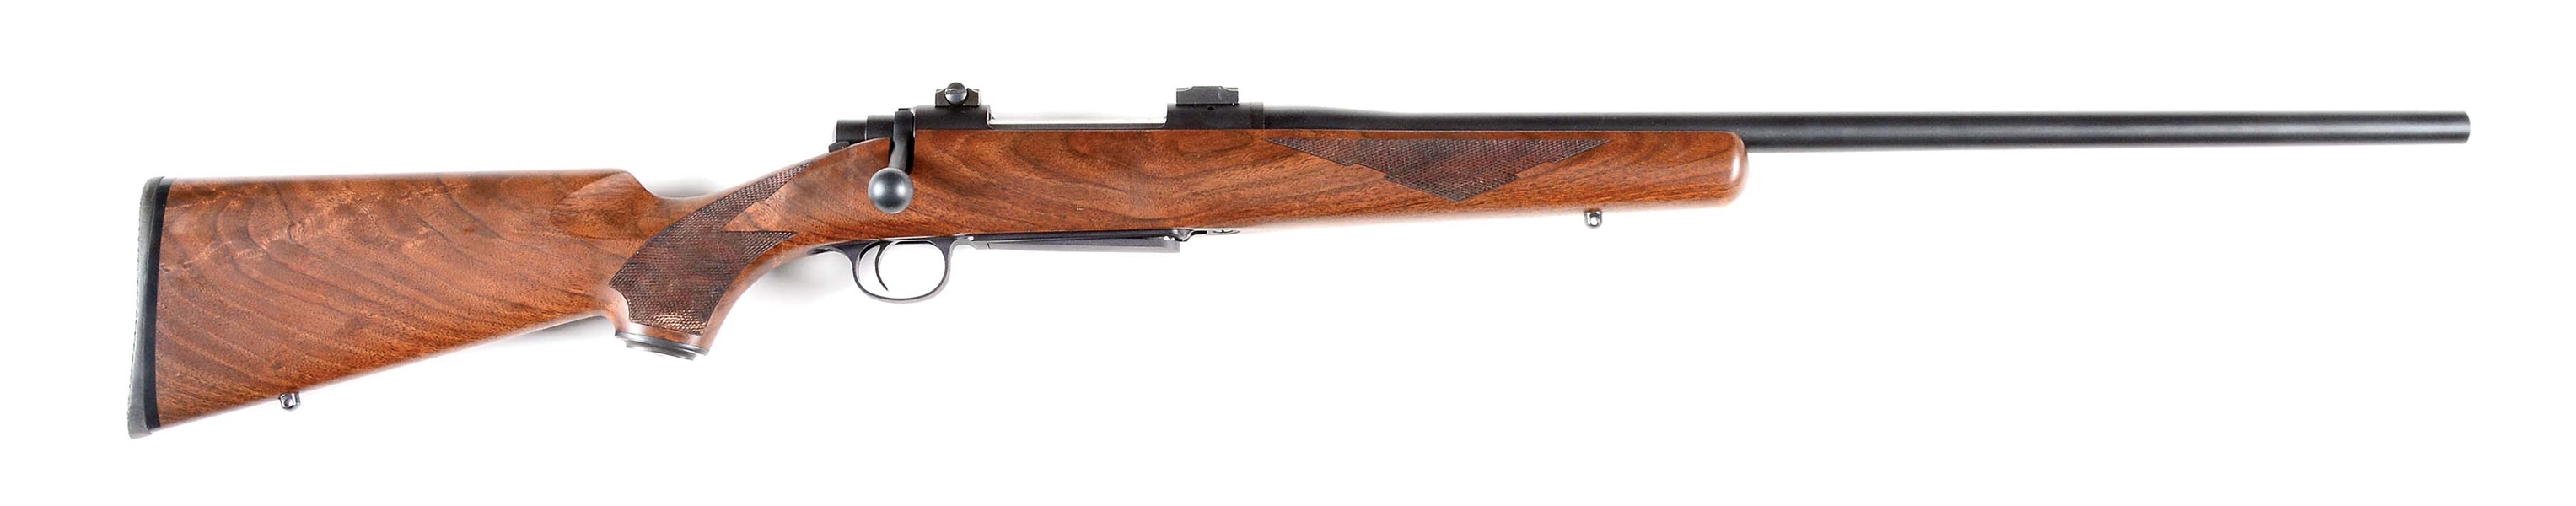 (M) COOPER ARMS MODEL 52 BOLT ACTION RIFLE.